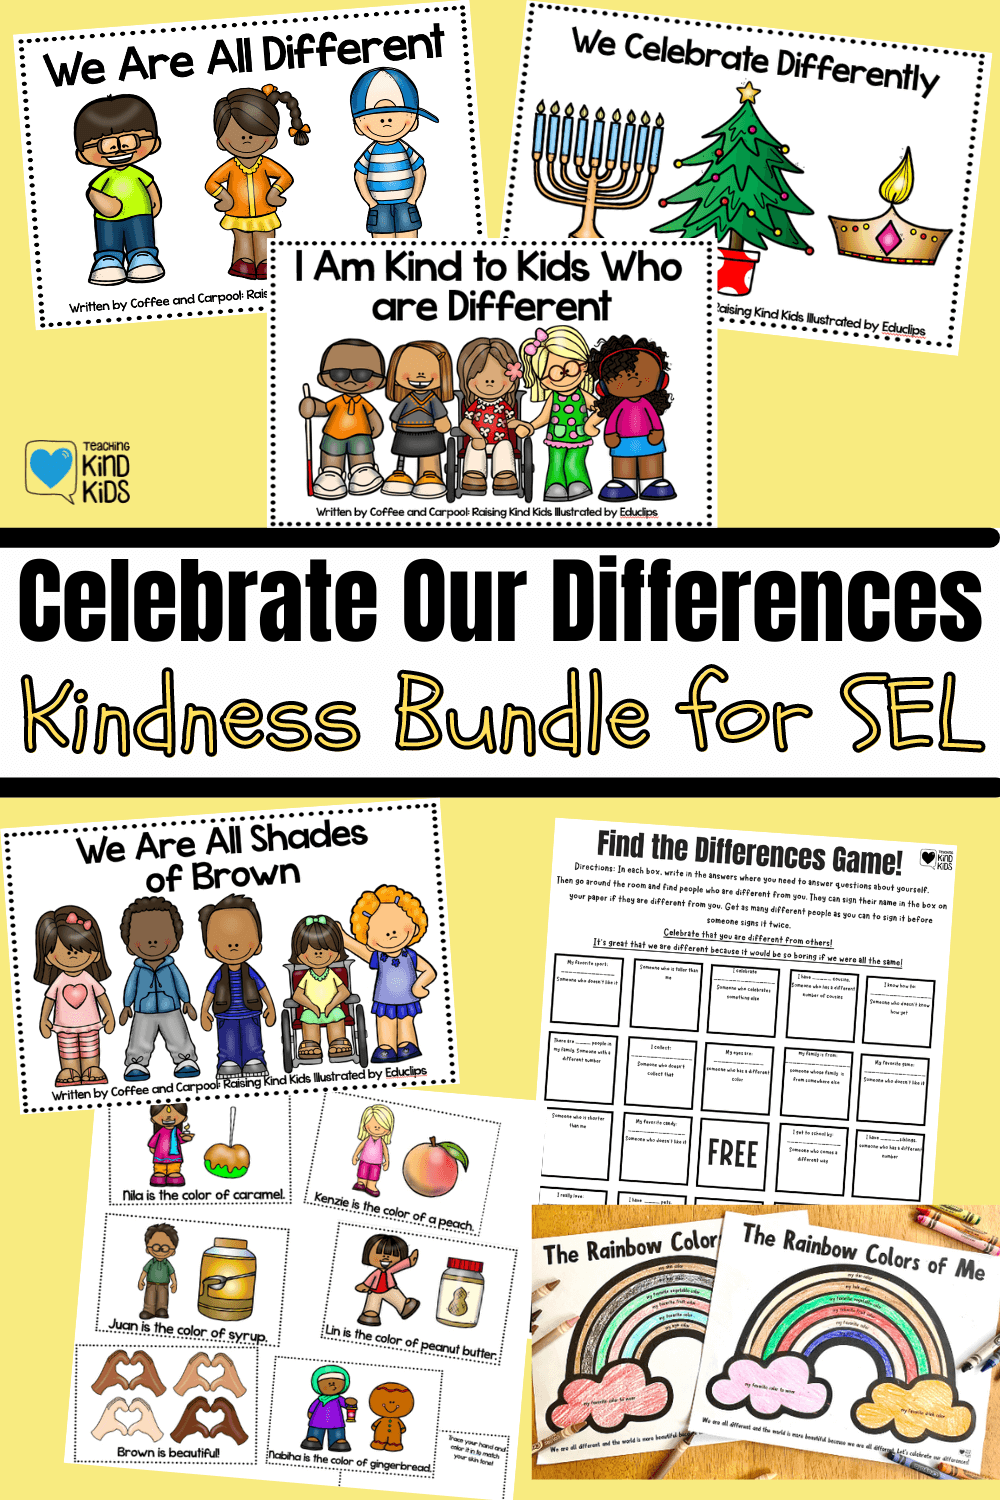 This Celebrate our differences bundle helps kids celebrate, showcase and appreciate our differences in fun, hands on ways. 